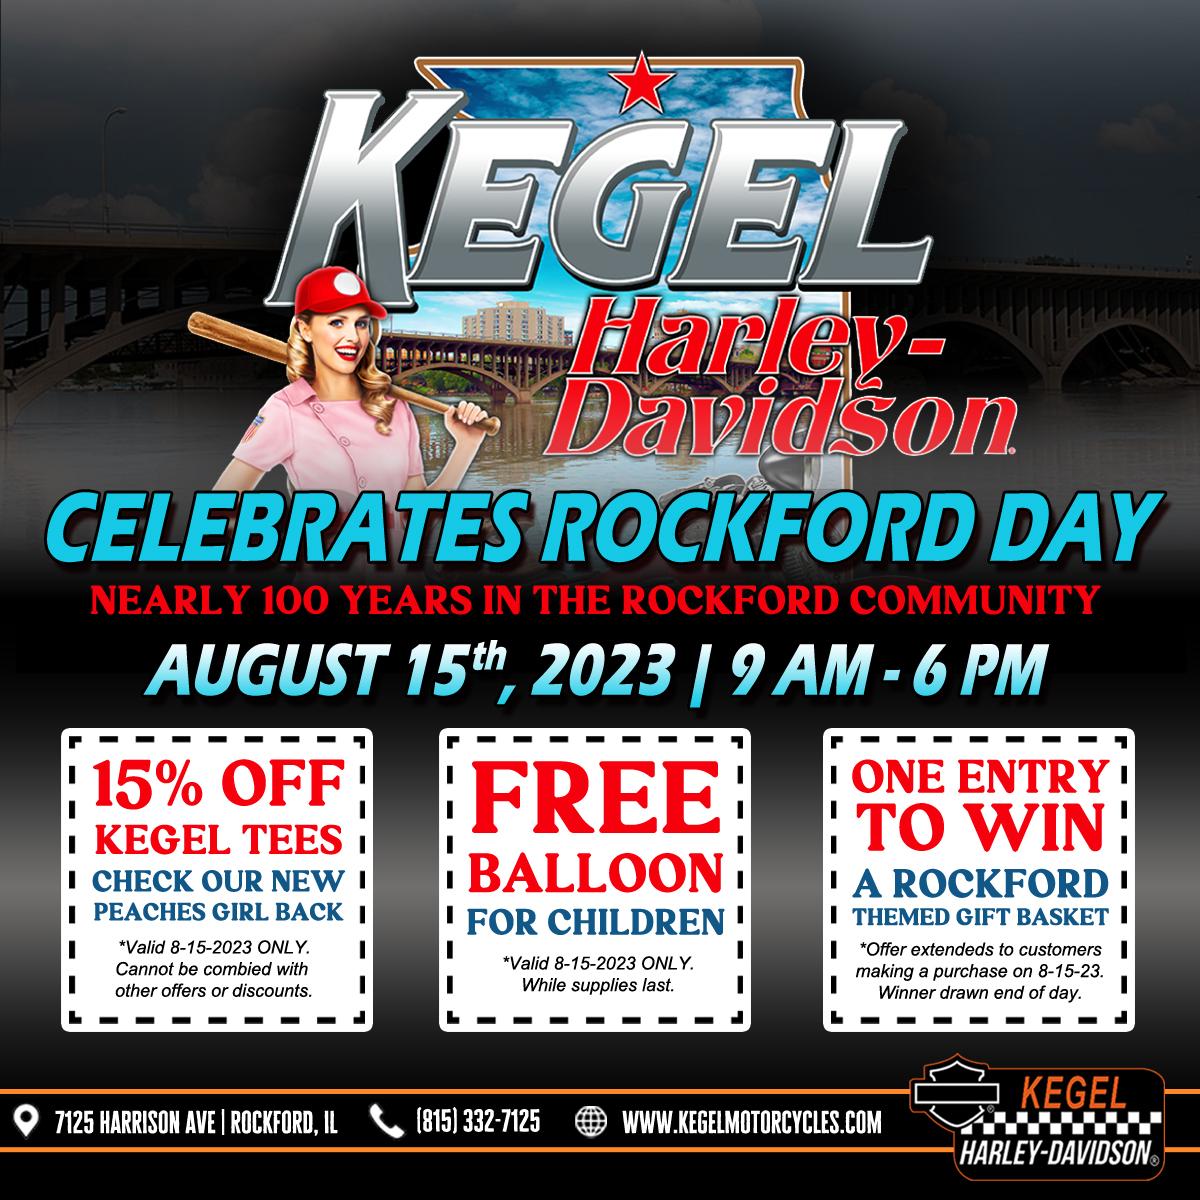 #KegelHD will be celebrating #RockfordDay2023 next Tuesday!

Stop in on 8.15 as we'll have 15% off all full-priced Kegel tees, plus every purchase gets you an entry to win a Rockford-themed basket we'll be giving away!

#funinthe815 #815day #815day2023 #rockfordil #rockfordday